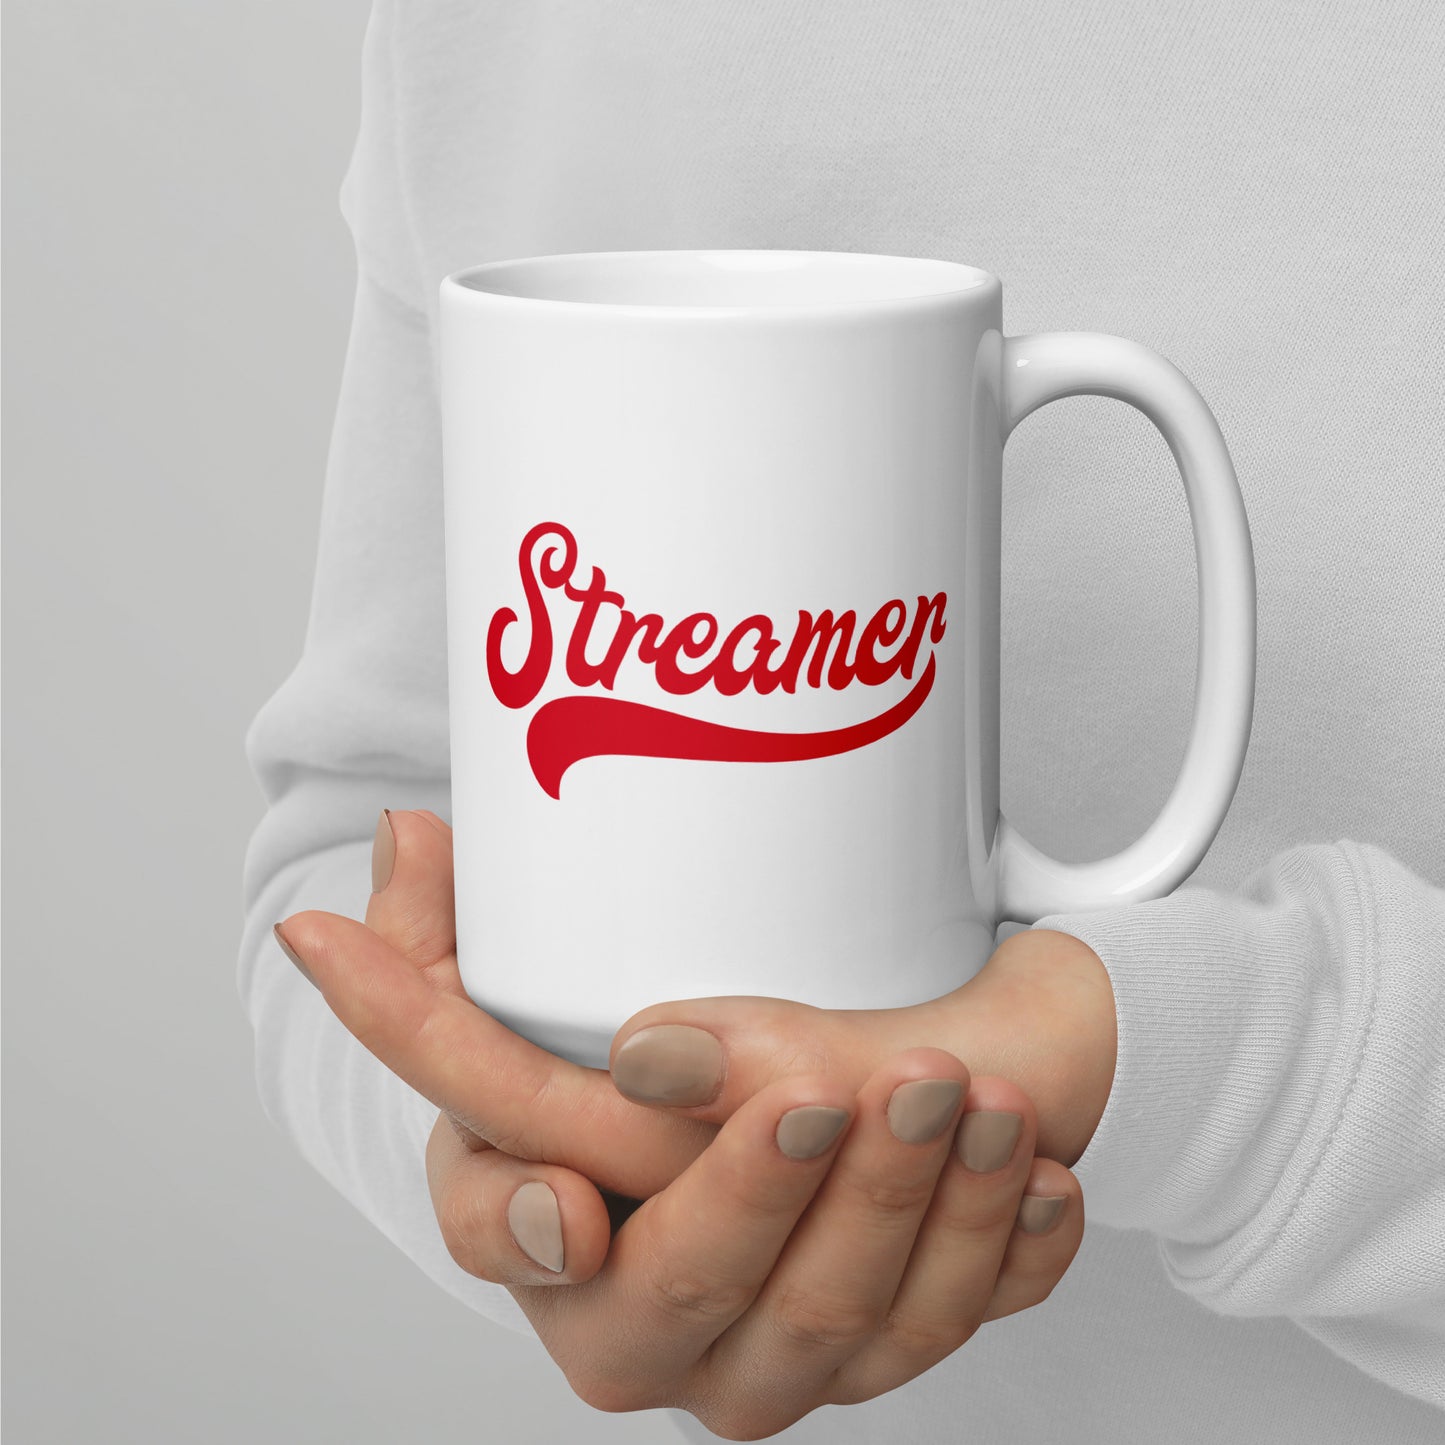 Red Glossy Streamer Mug (two sizes available)